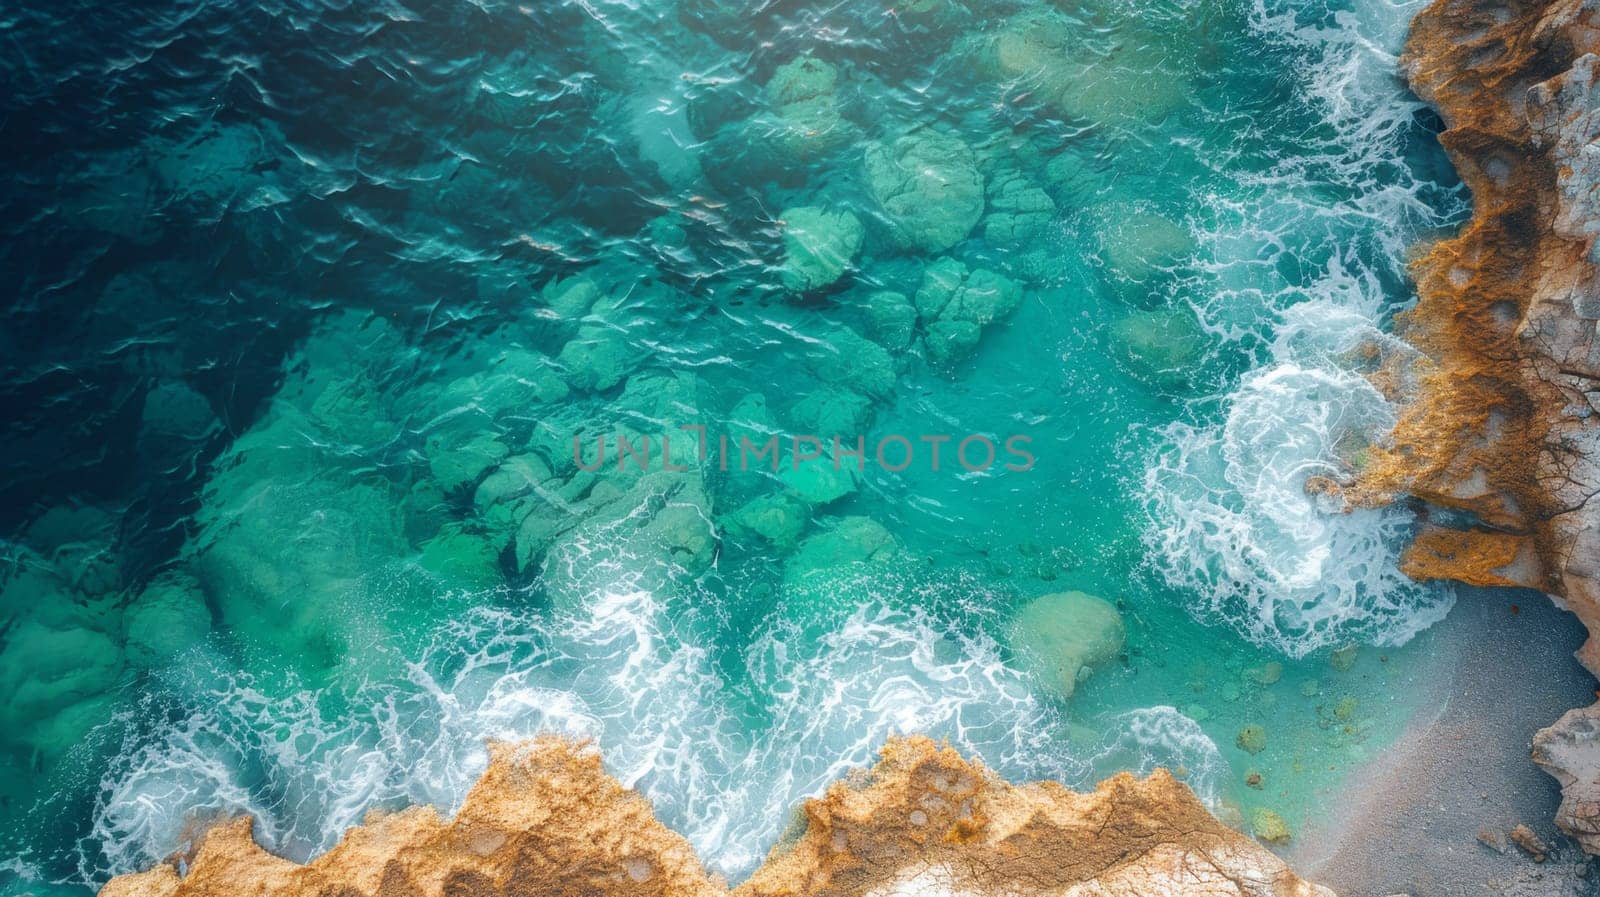 View from above of the crystal clear water along the shoreline with rocky seabed.